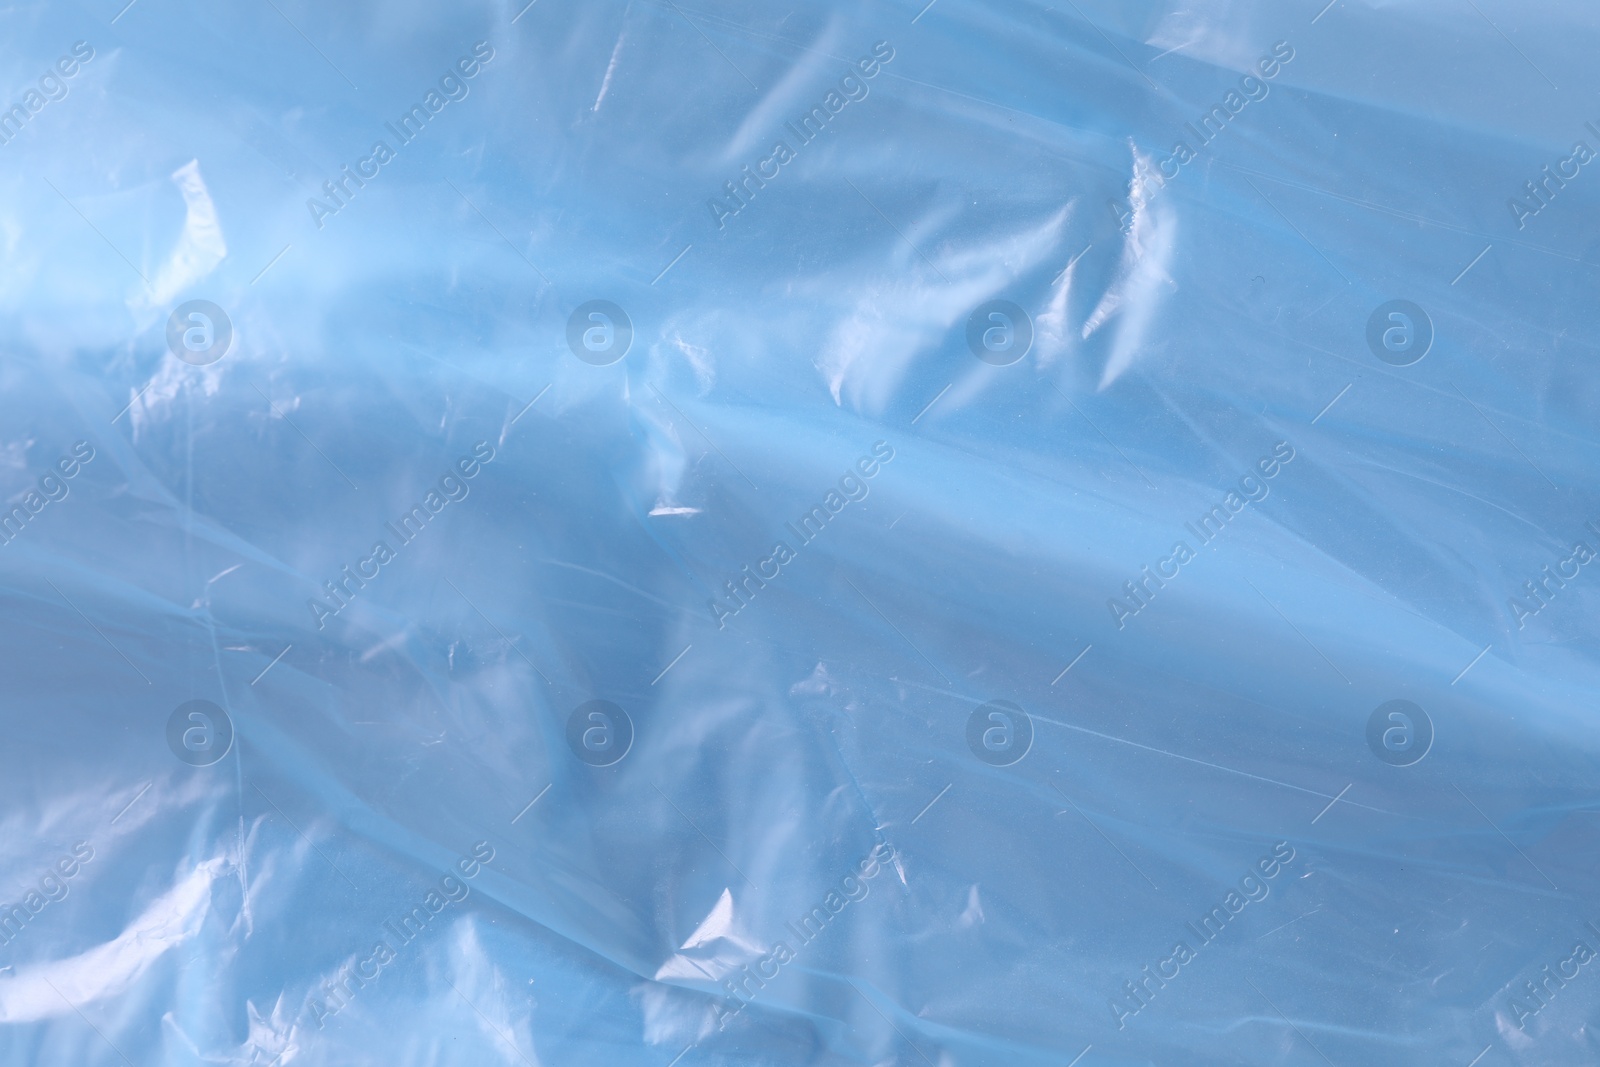 Photo of Texture of light blue plastic bag as background, closeup